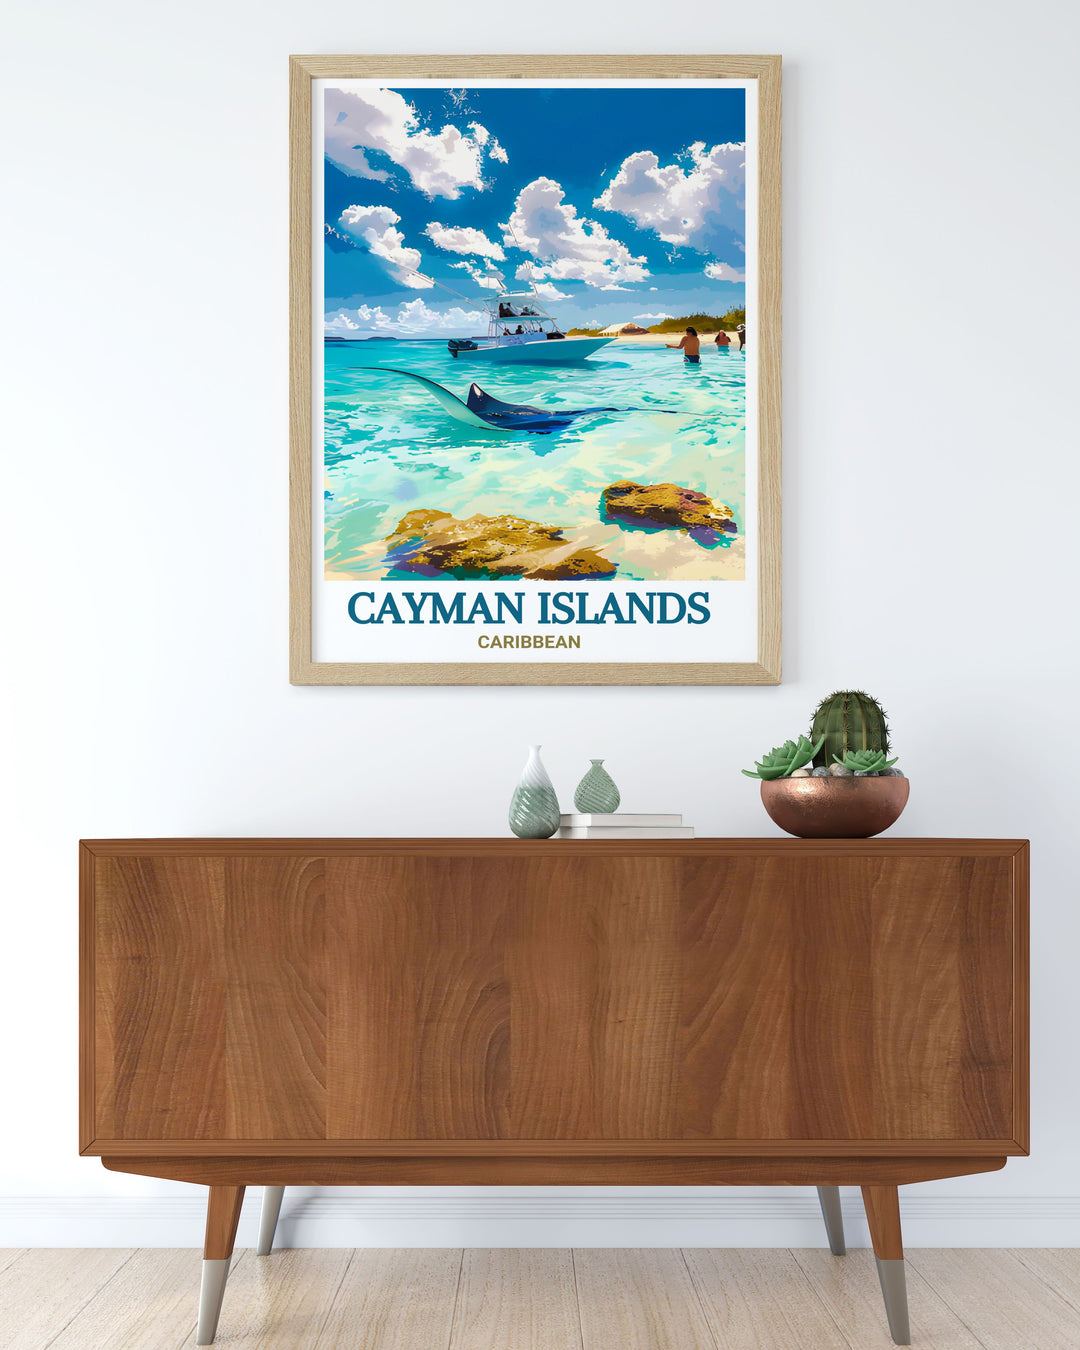 Beautiful Stingray City home decor print capturing the essence of the Cayman Islands in a timeless black and white design ideal for travel enthusiasts and art lovers looking to add a touch of the Caribbean to their decor